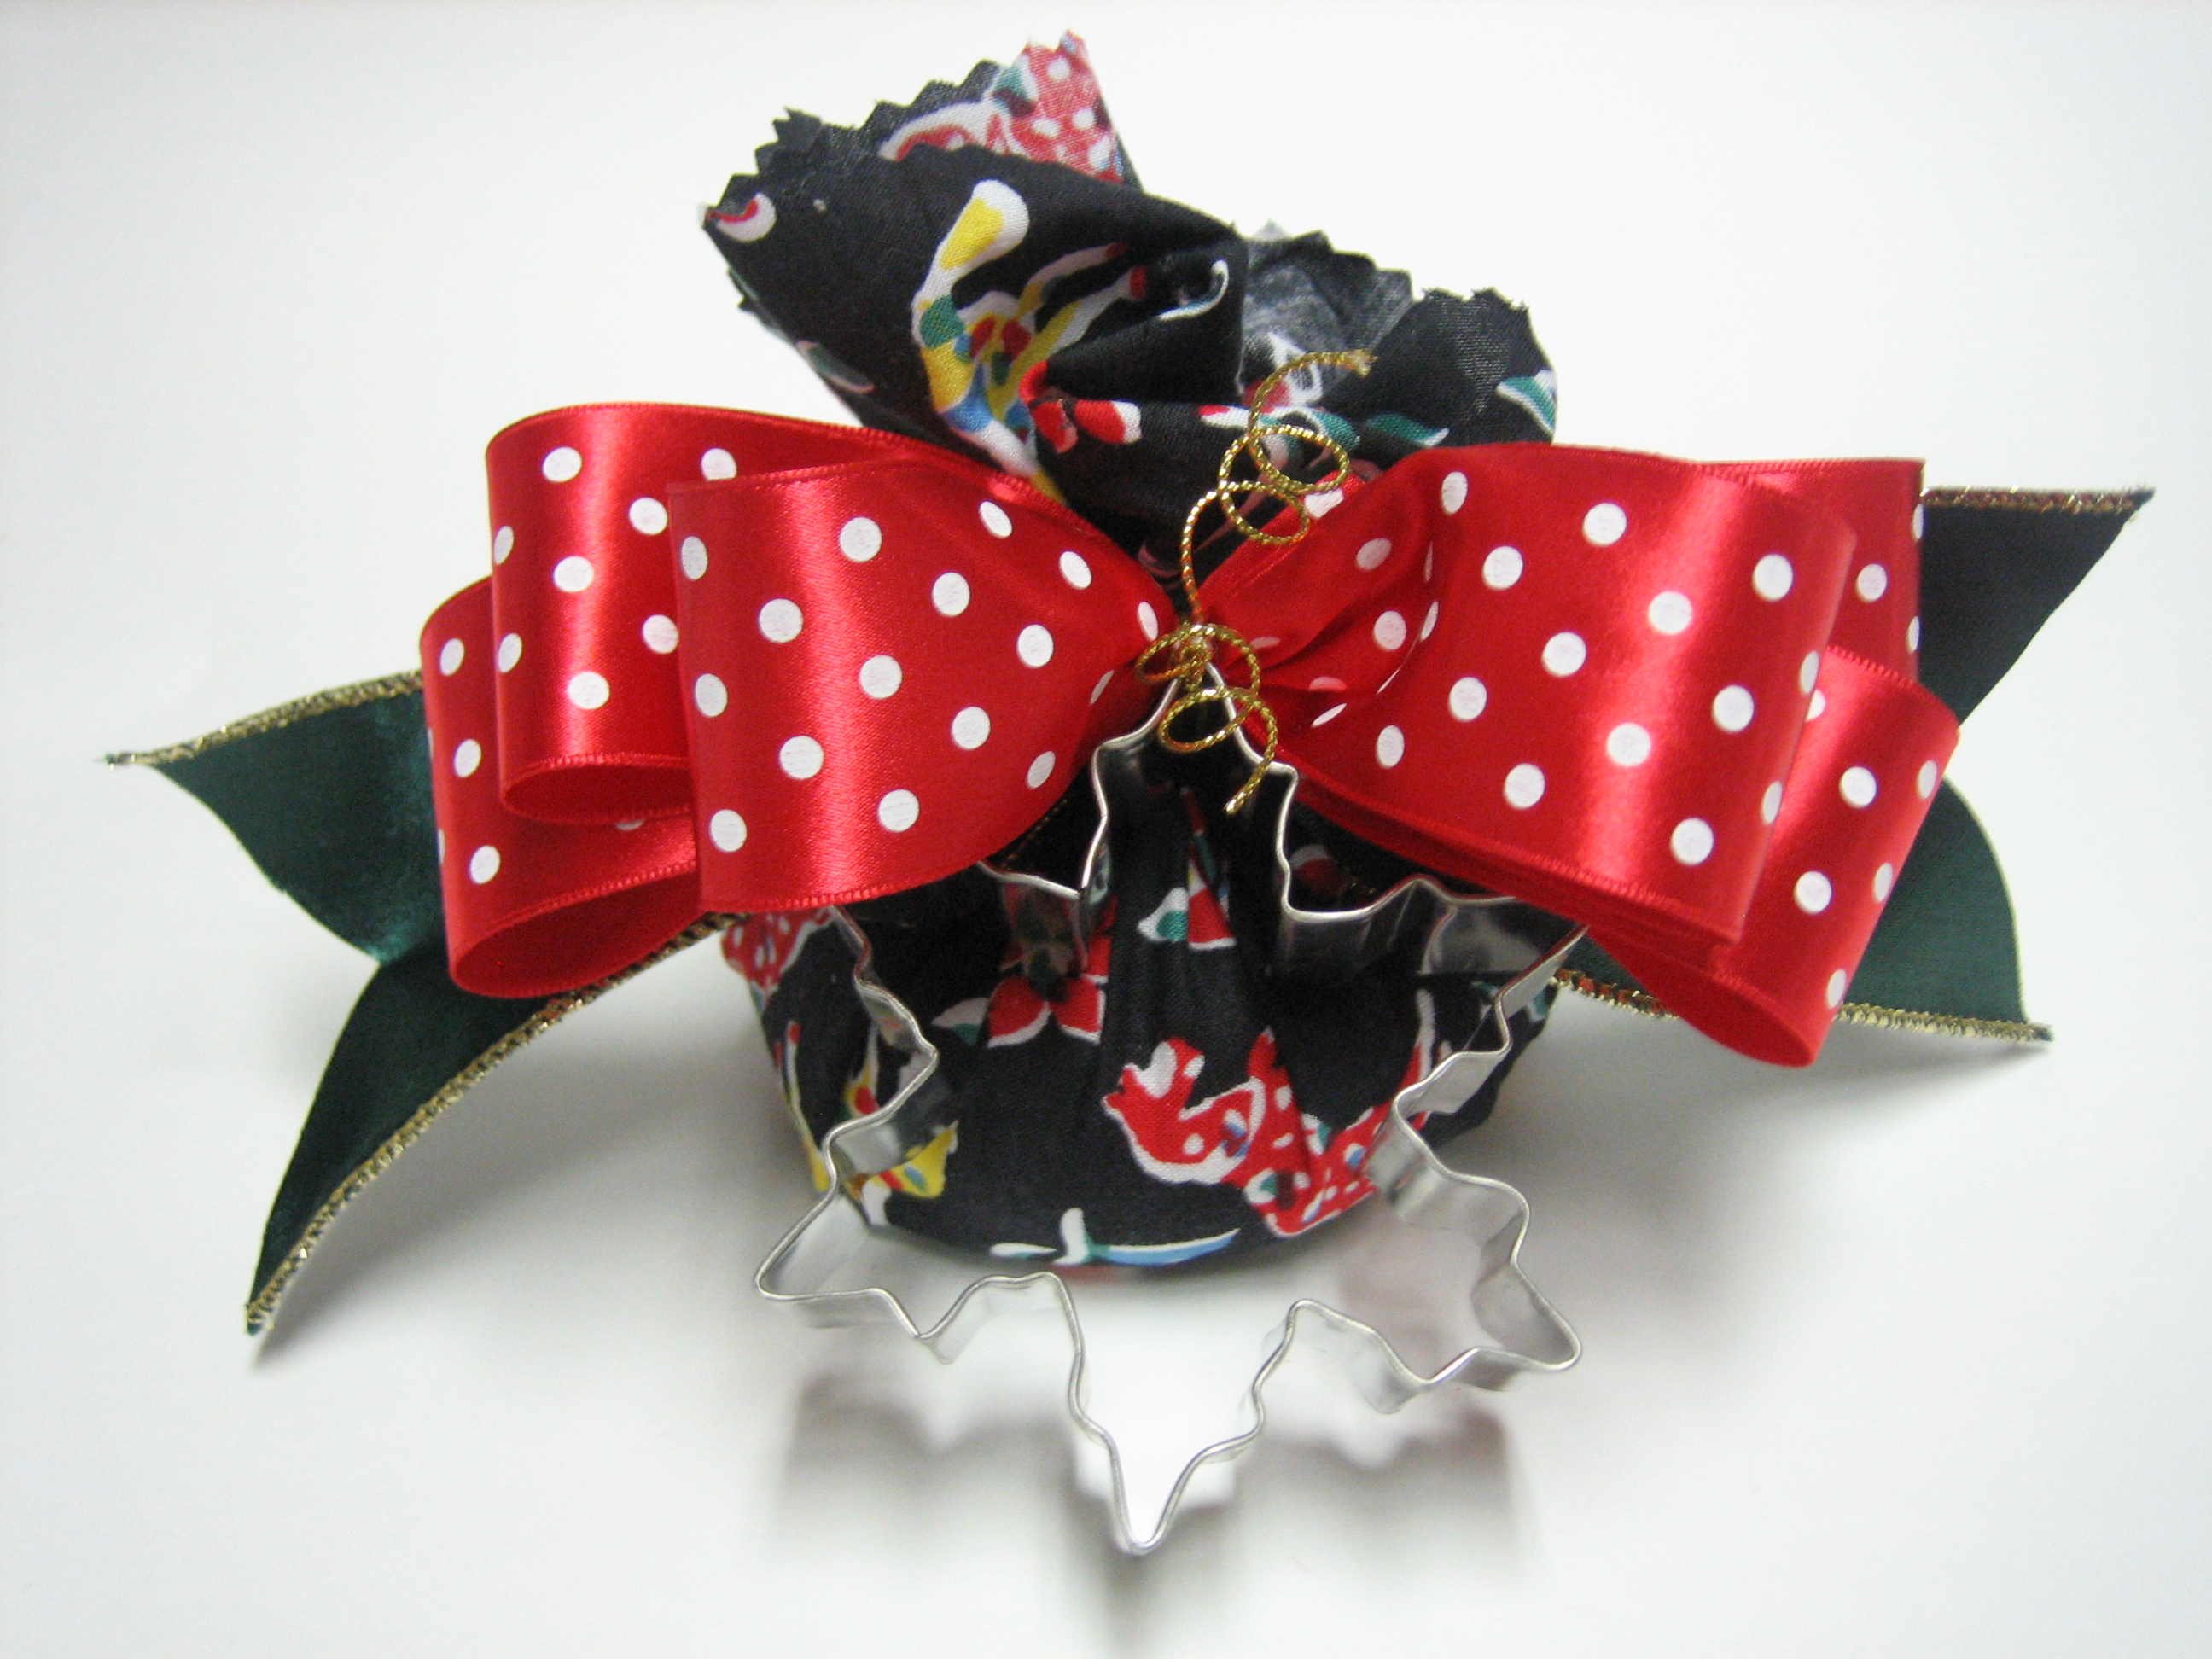 Play Dough Gift - Make Gift Bows with Bowdabra bow maker tool